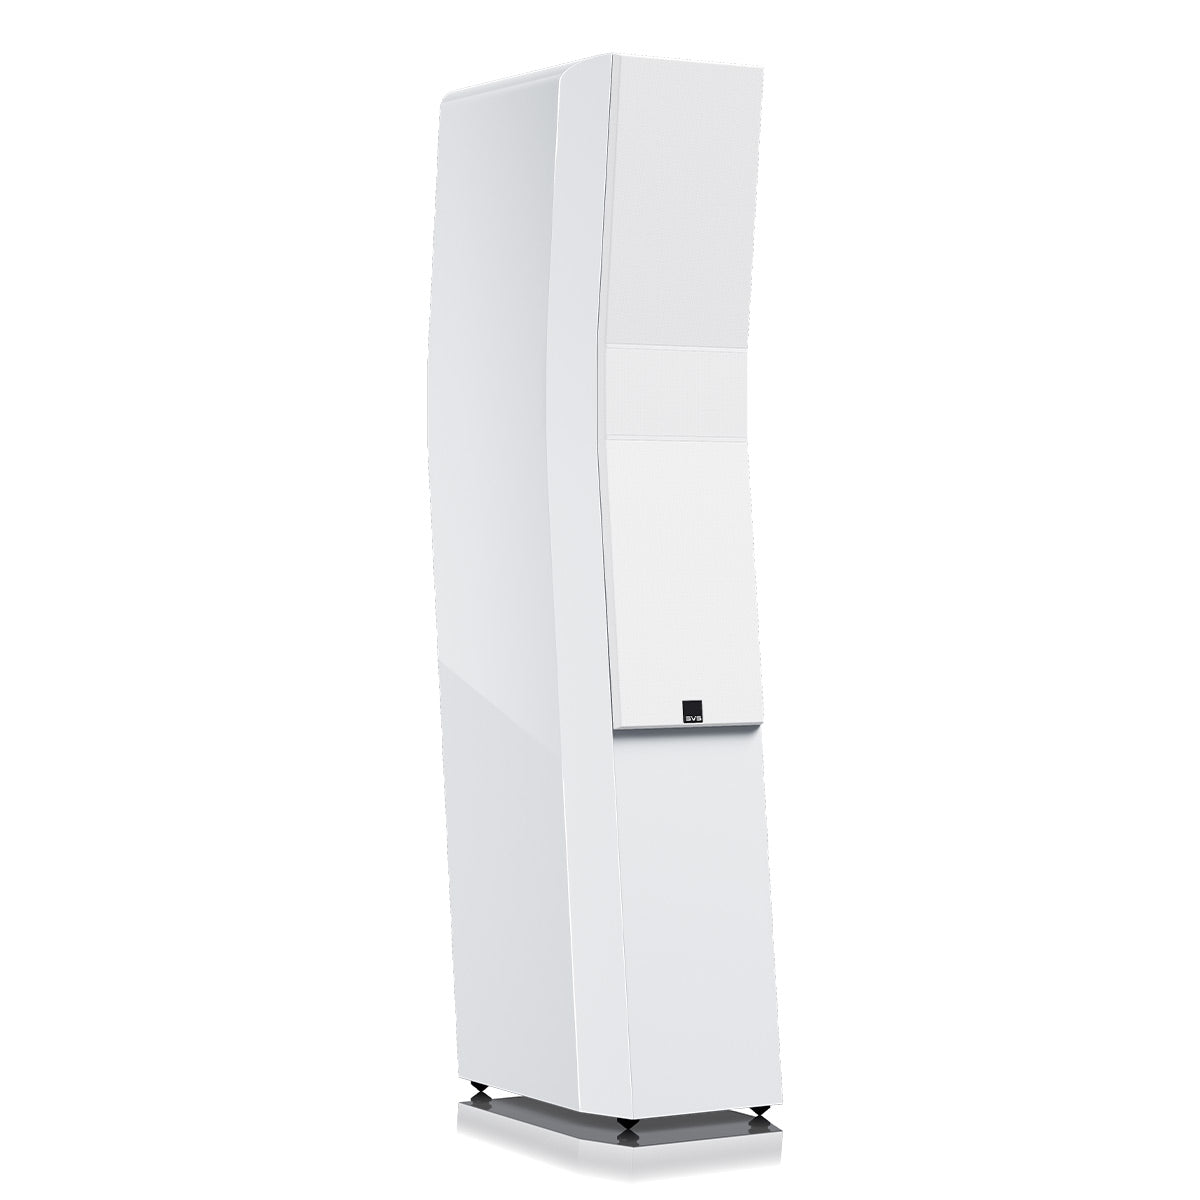 SVS Ultra Evolution Titan 3-Way Tower Speaker with Quad 6.5" Woofers - Each (Piano Gloss White)